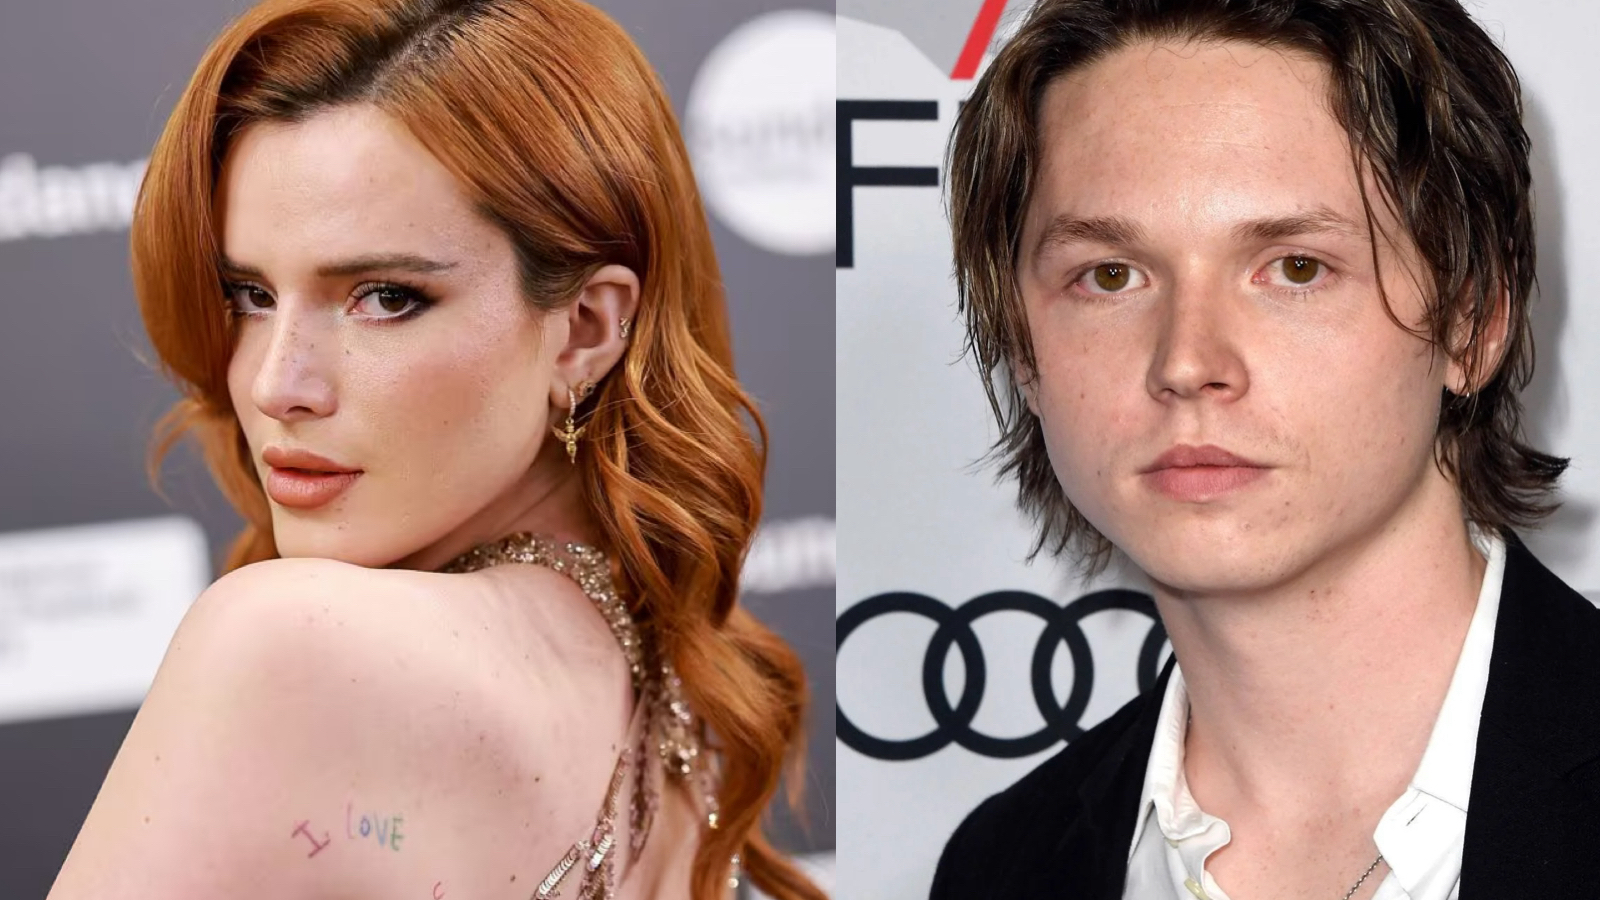 The Tower: Bella Thorne and Jack Kilmer protagonists of a fantasy focused on mermaids